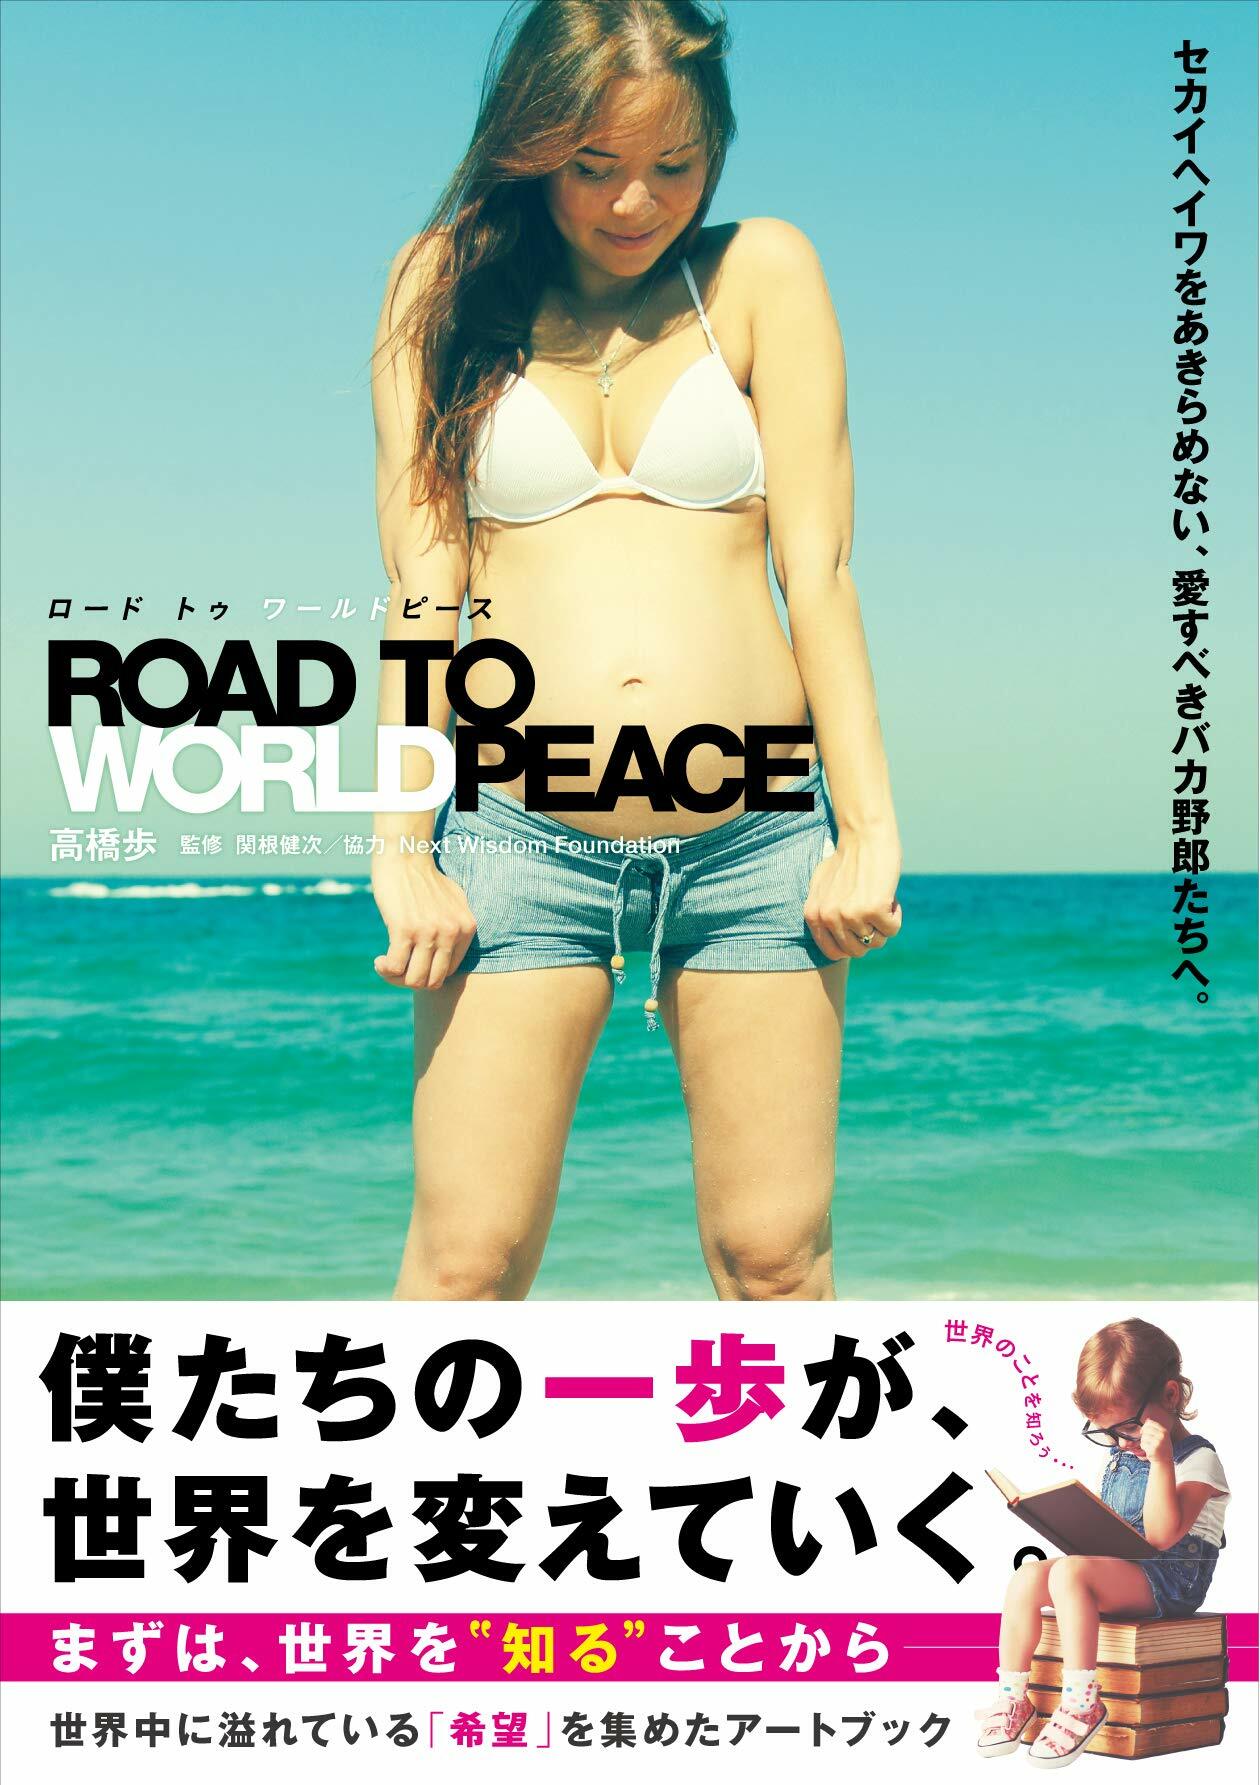 ROAD TO WORLD PEACE